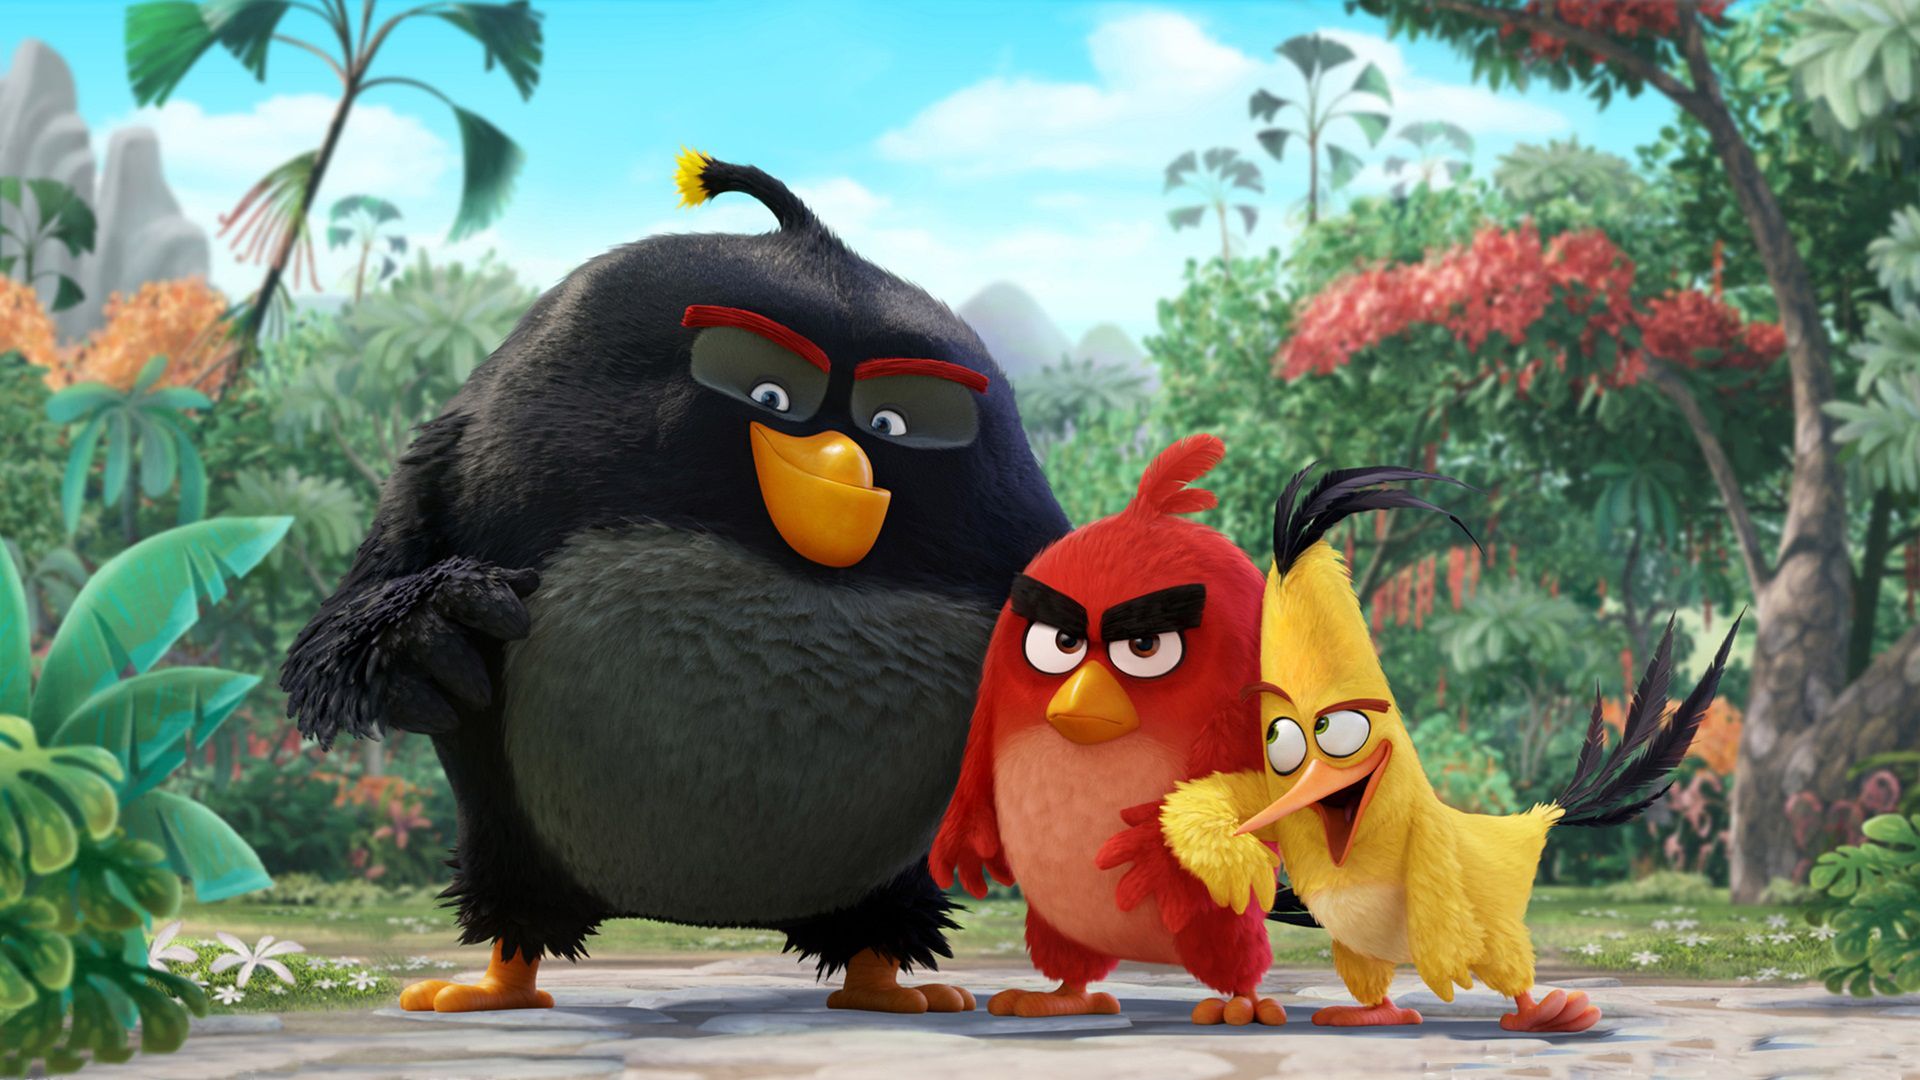 Angry Birds mozifilm trailer!